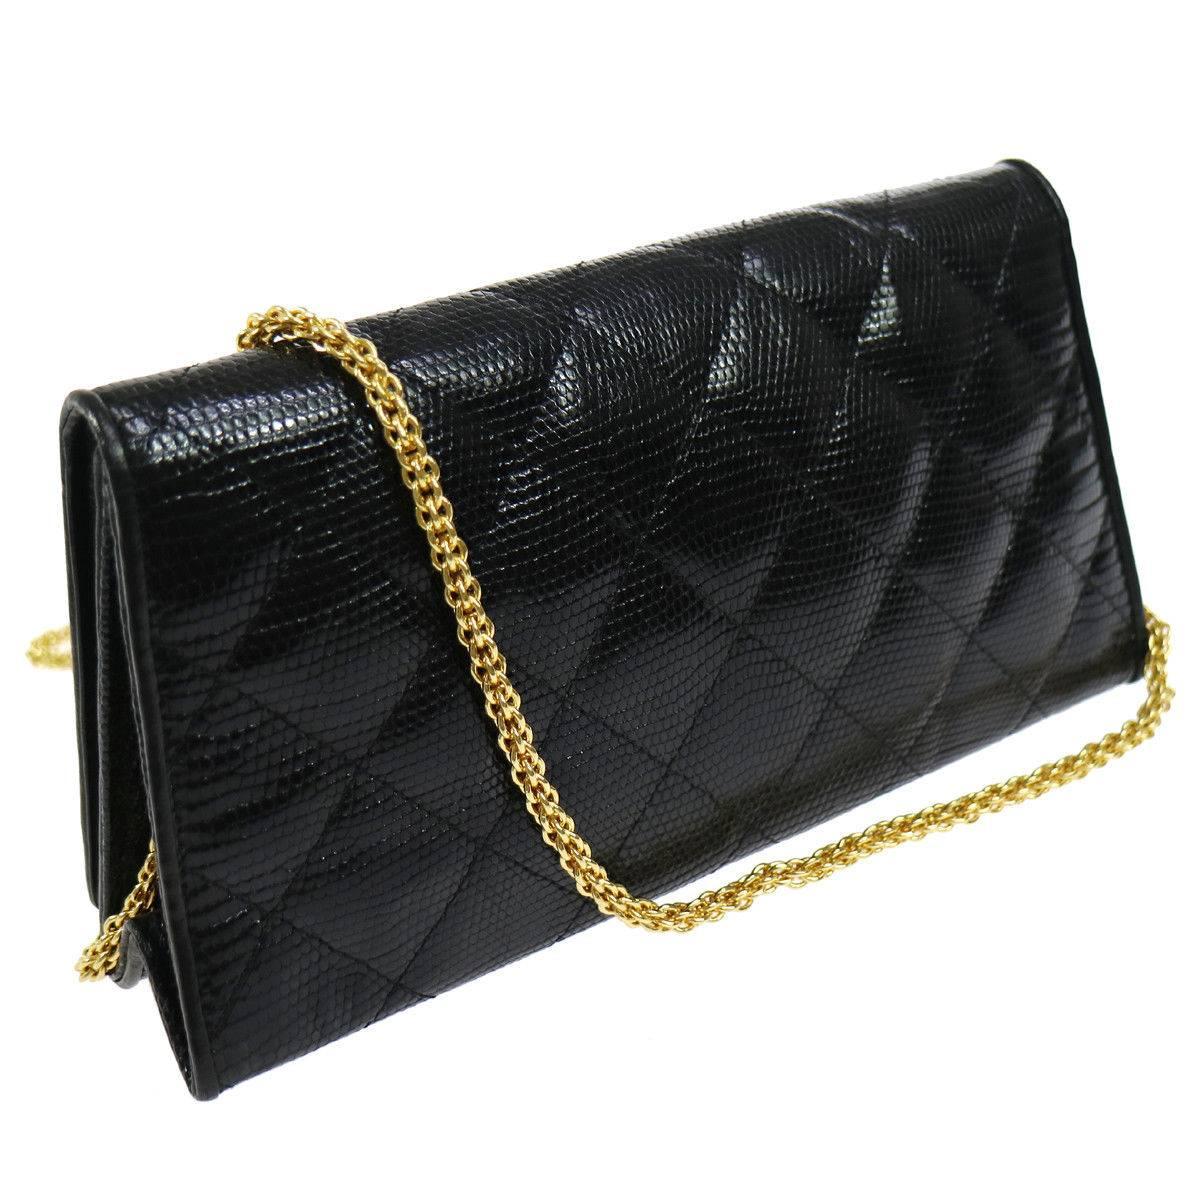 chanel black bag with gold chain